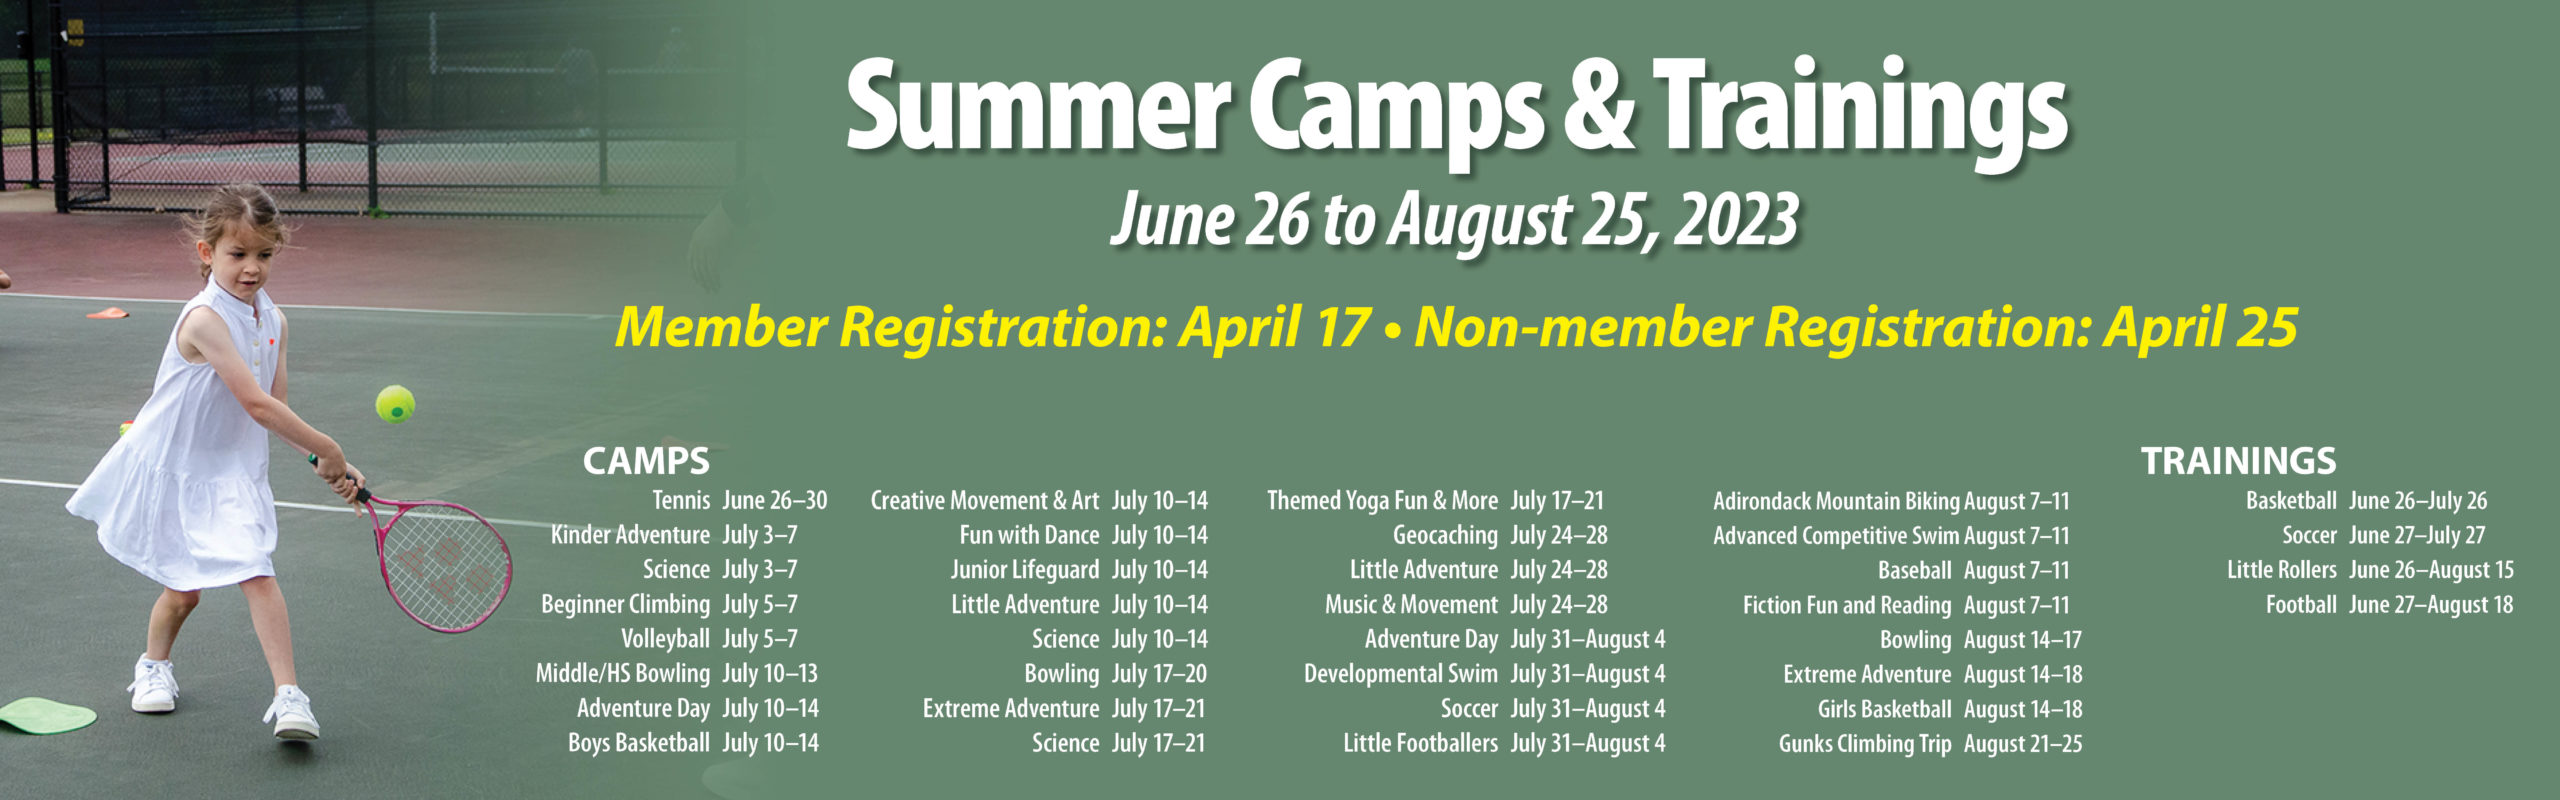 2023 Summer Camps & Trainings